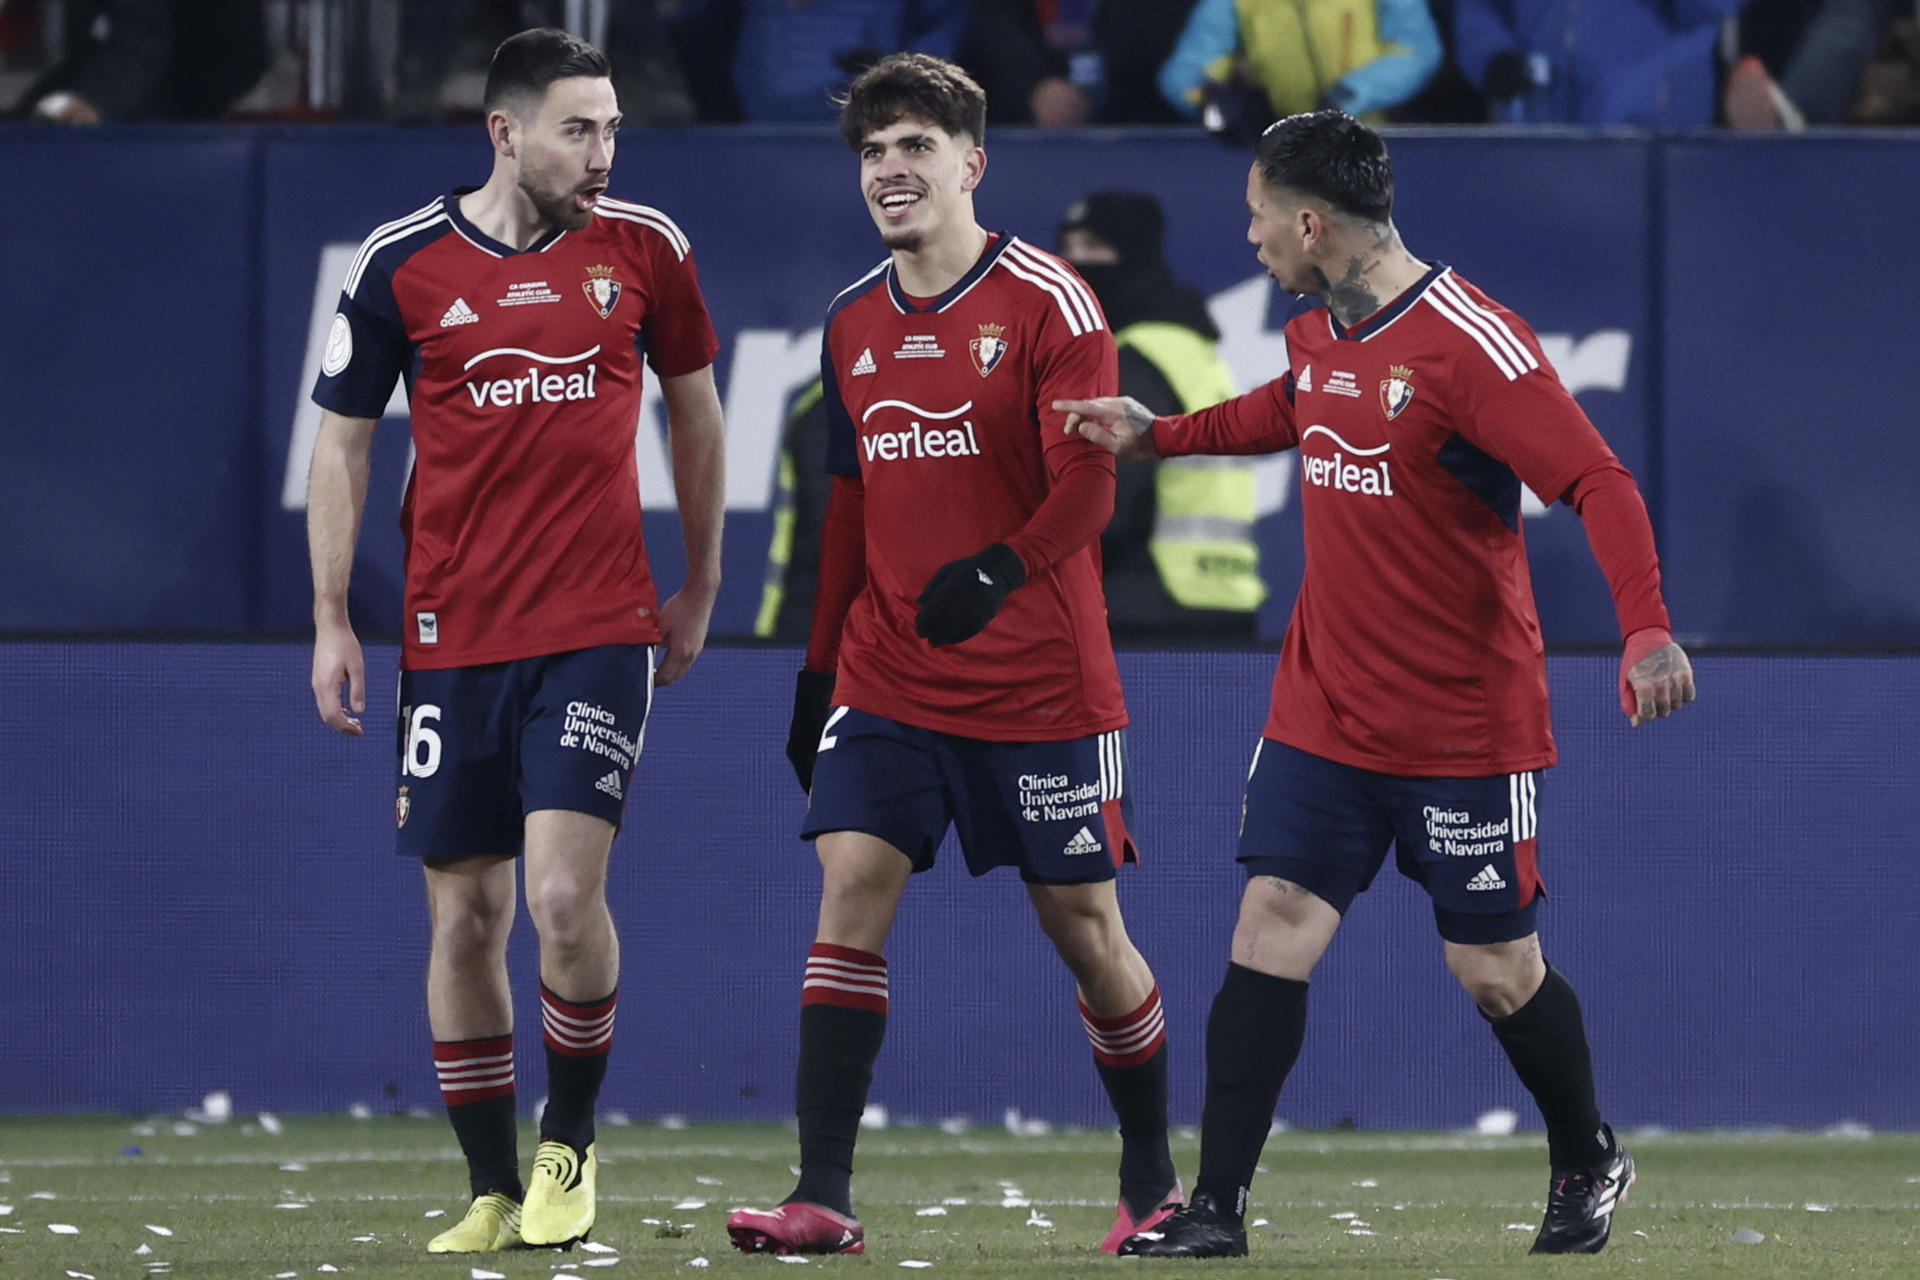 Osasuna's Abde Ezzalzouli (C) celebrates with teammates Moi Gomez (L) and Chimy Avila after scoring against Athletic during the Copa del Rey semifinal first leg in Pamplona, Spain, on 1 March 2023. EFE/Jesus Diges